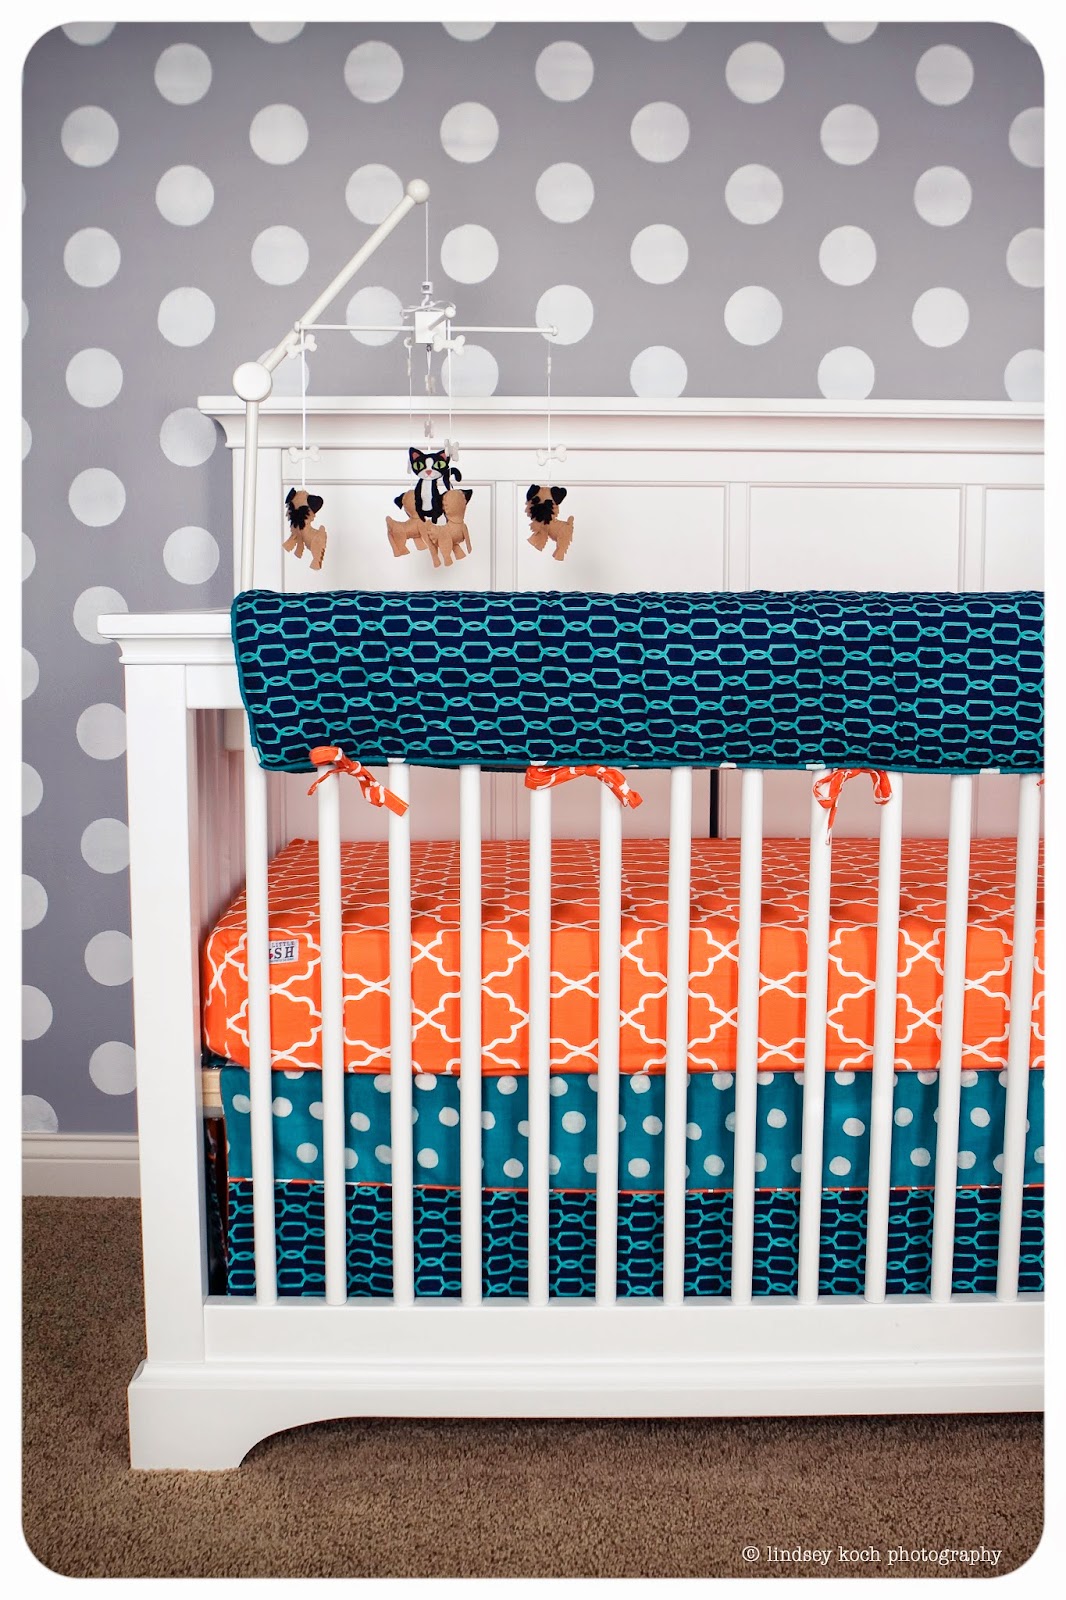 A stenciled nursery in gray with aqua and orange with a Polka Dot stenciled accent wall from Cutting Edge Stencils. http://www.cuttingedgestencils.com/polka-dots-stencils-nursery.html